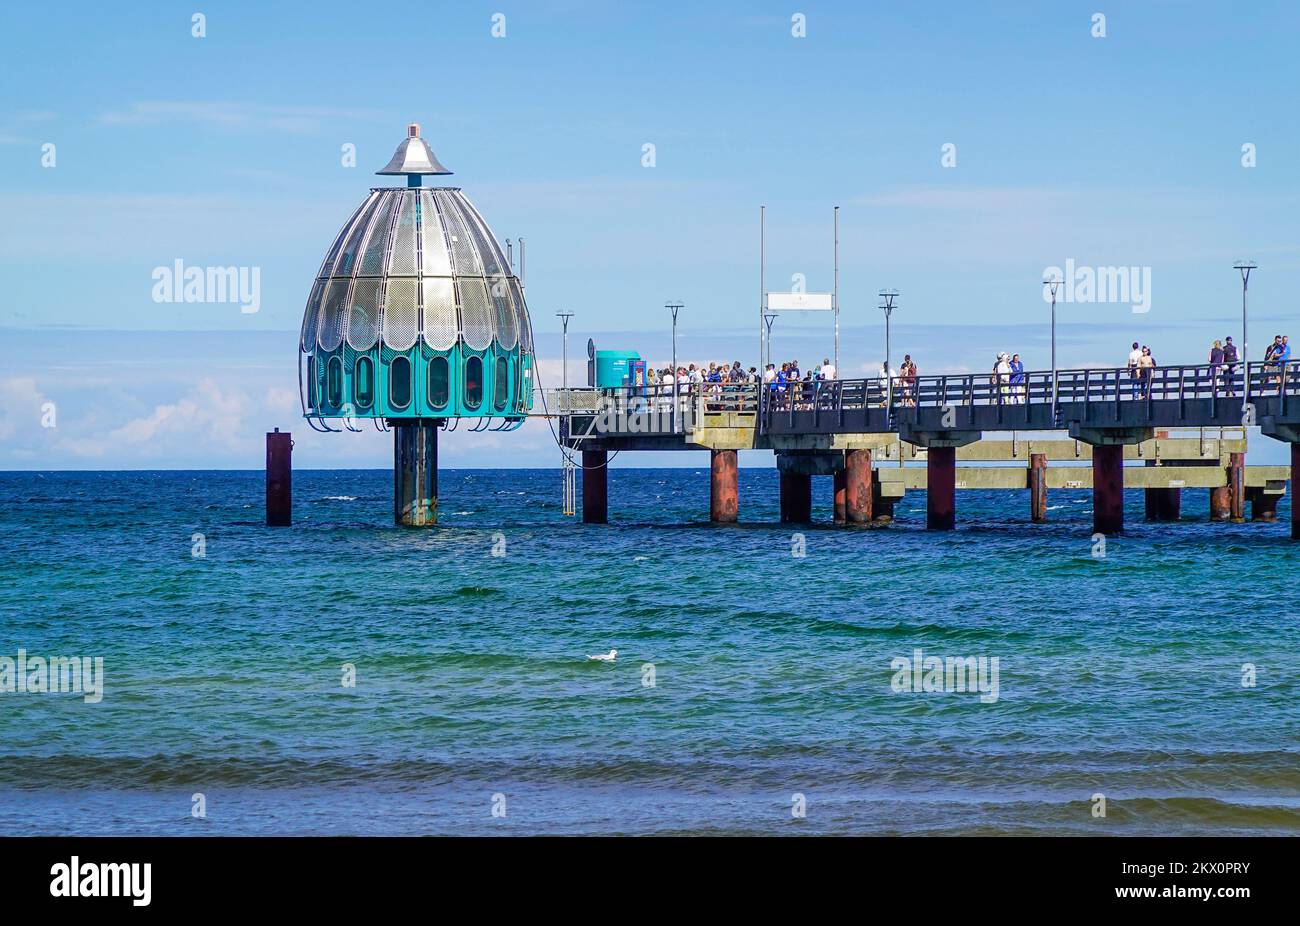 Alamy seebrucke photography Zingst images hi-res stock - and